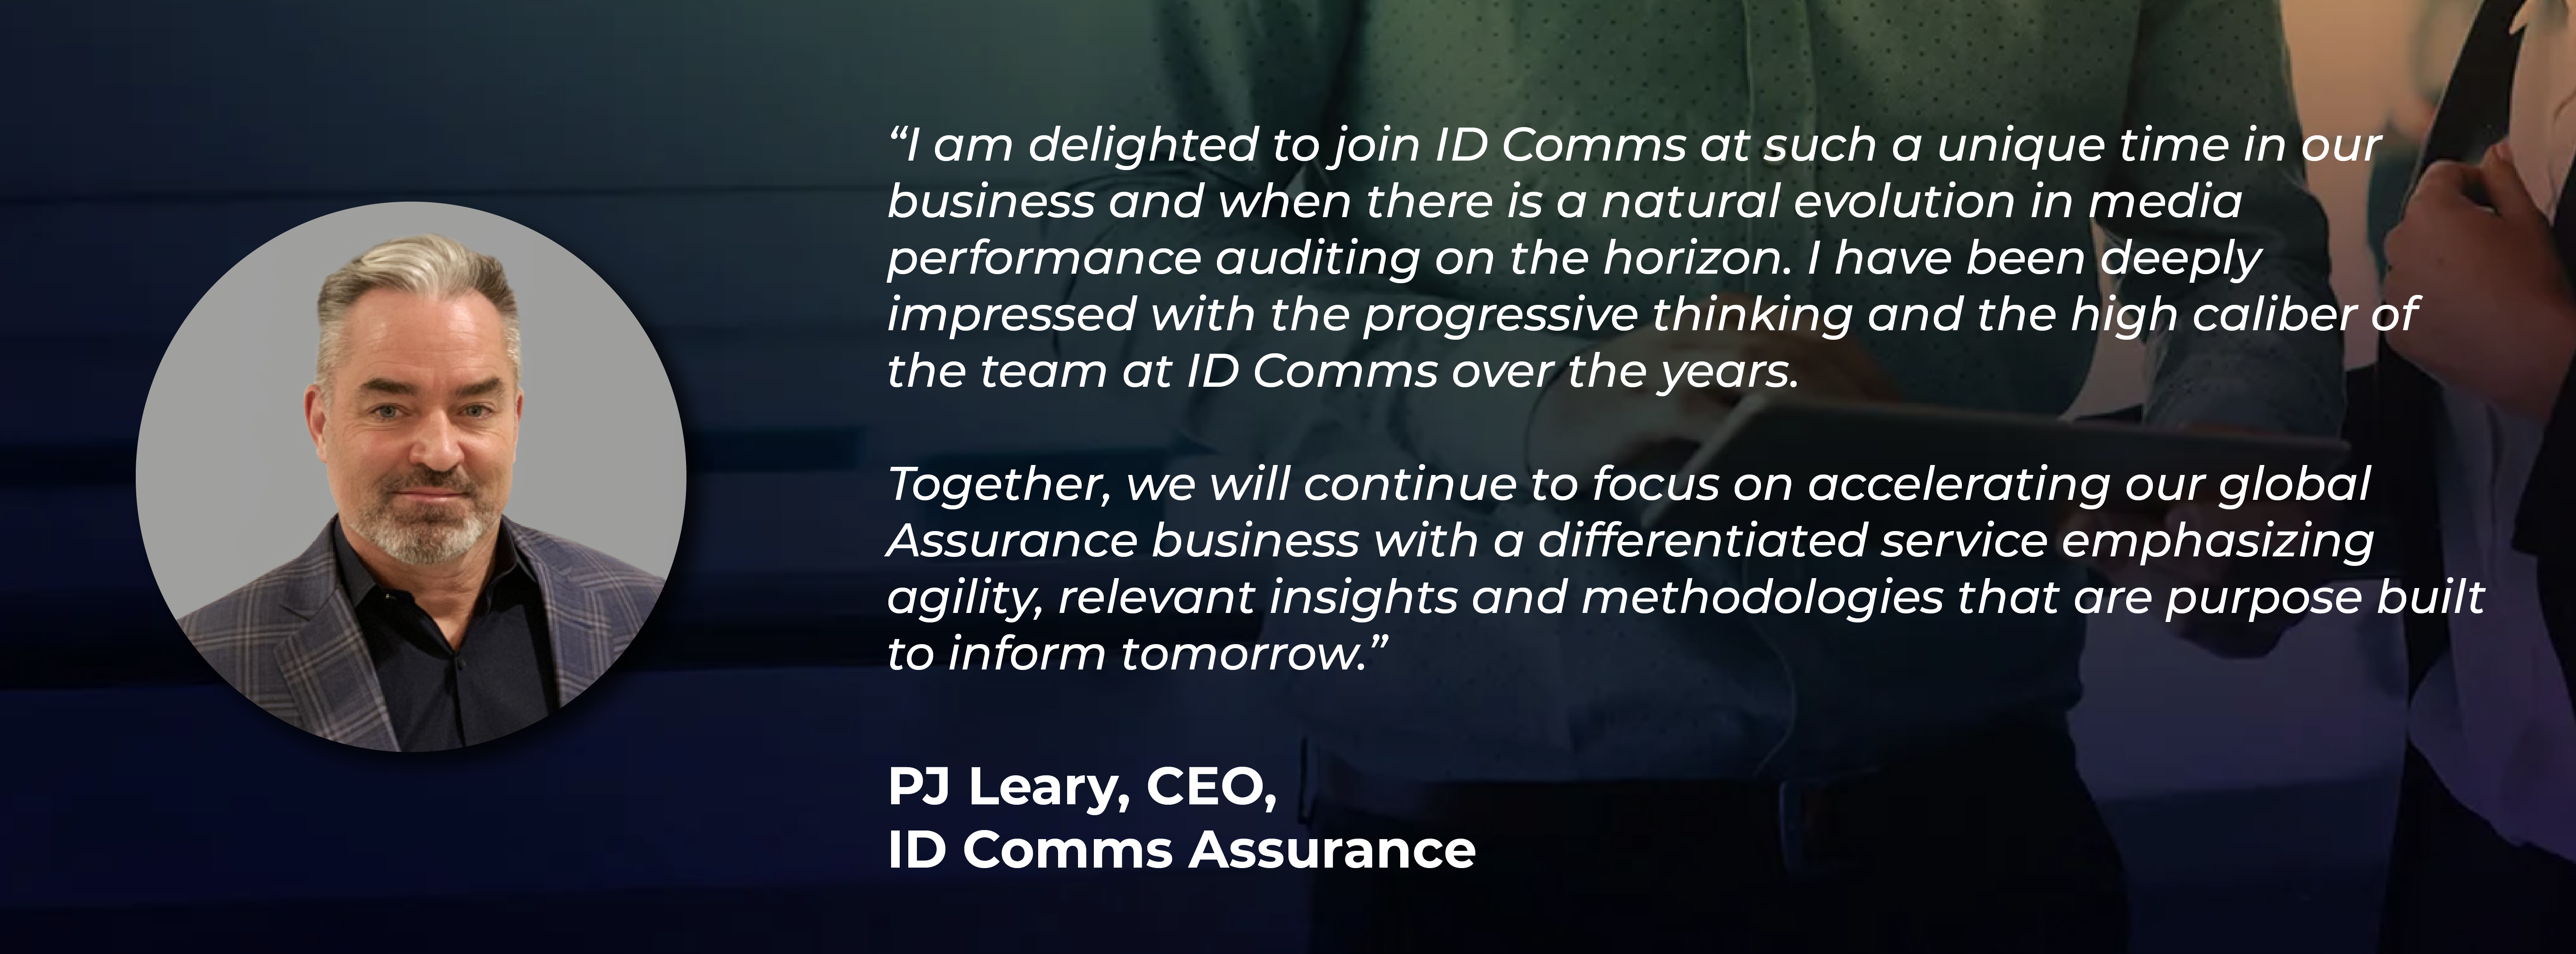 PJ Leary quote_ID Comms Assurance-01